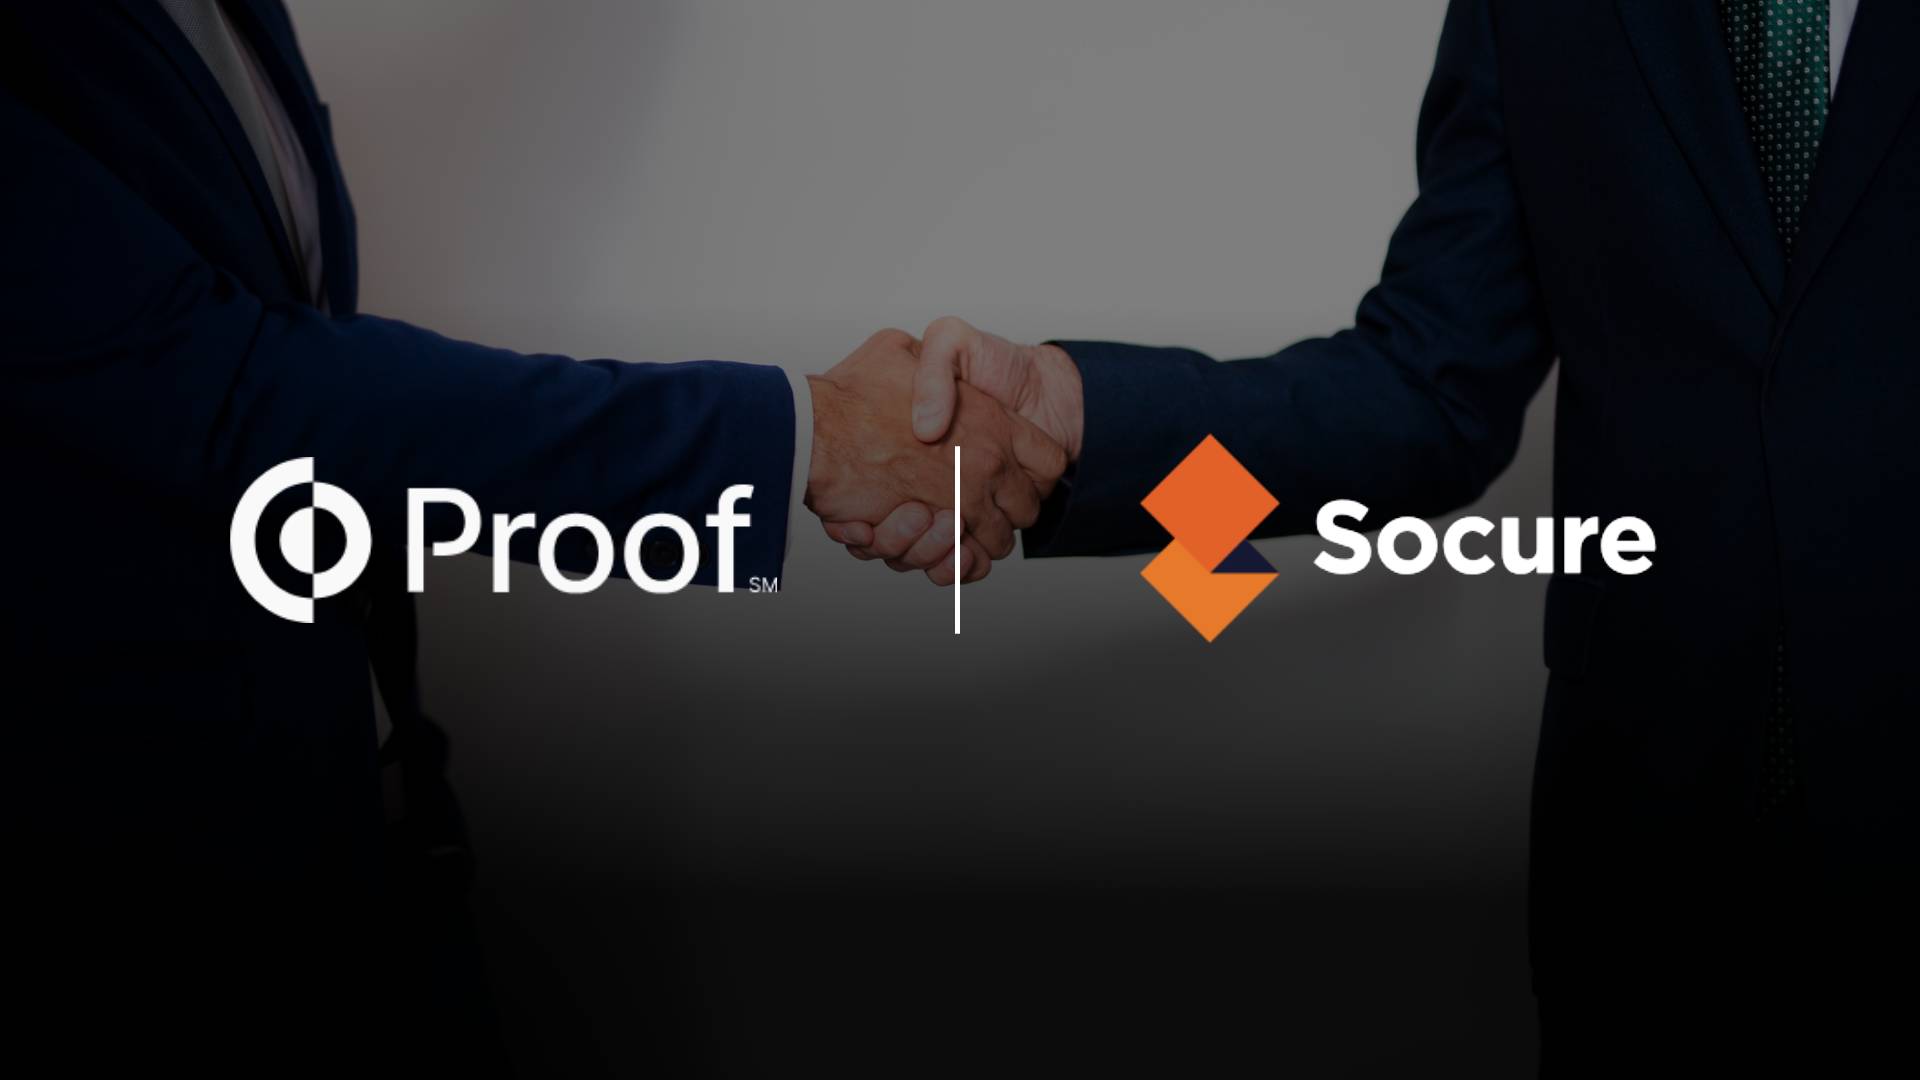 Proof and Socure Partner to Revolutionize Fraud Prevention in Digital Transactions